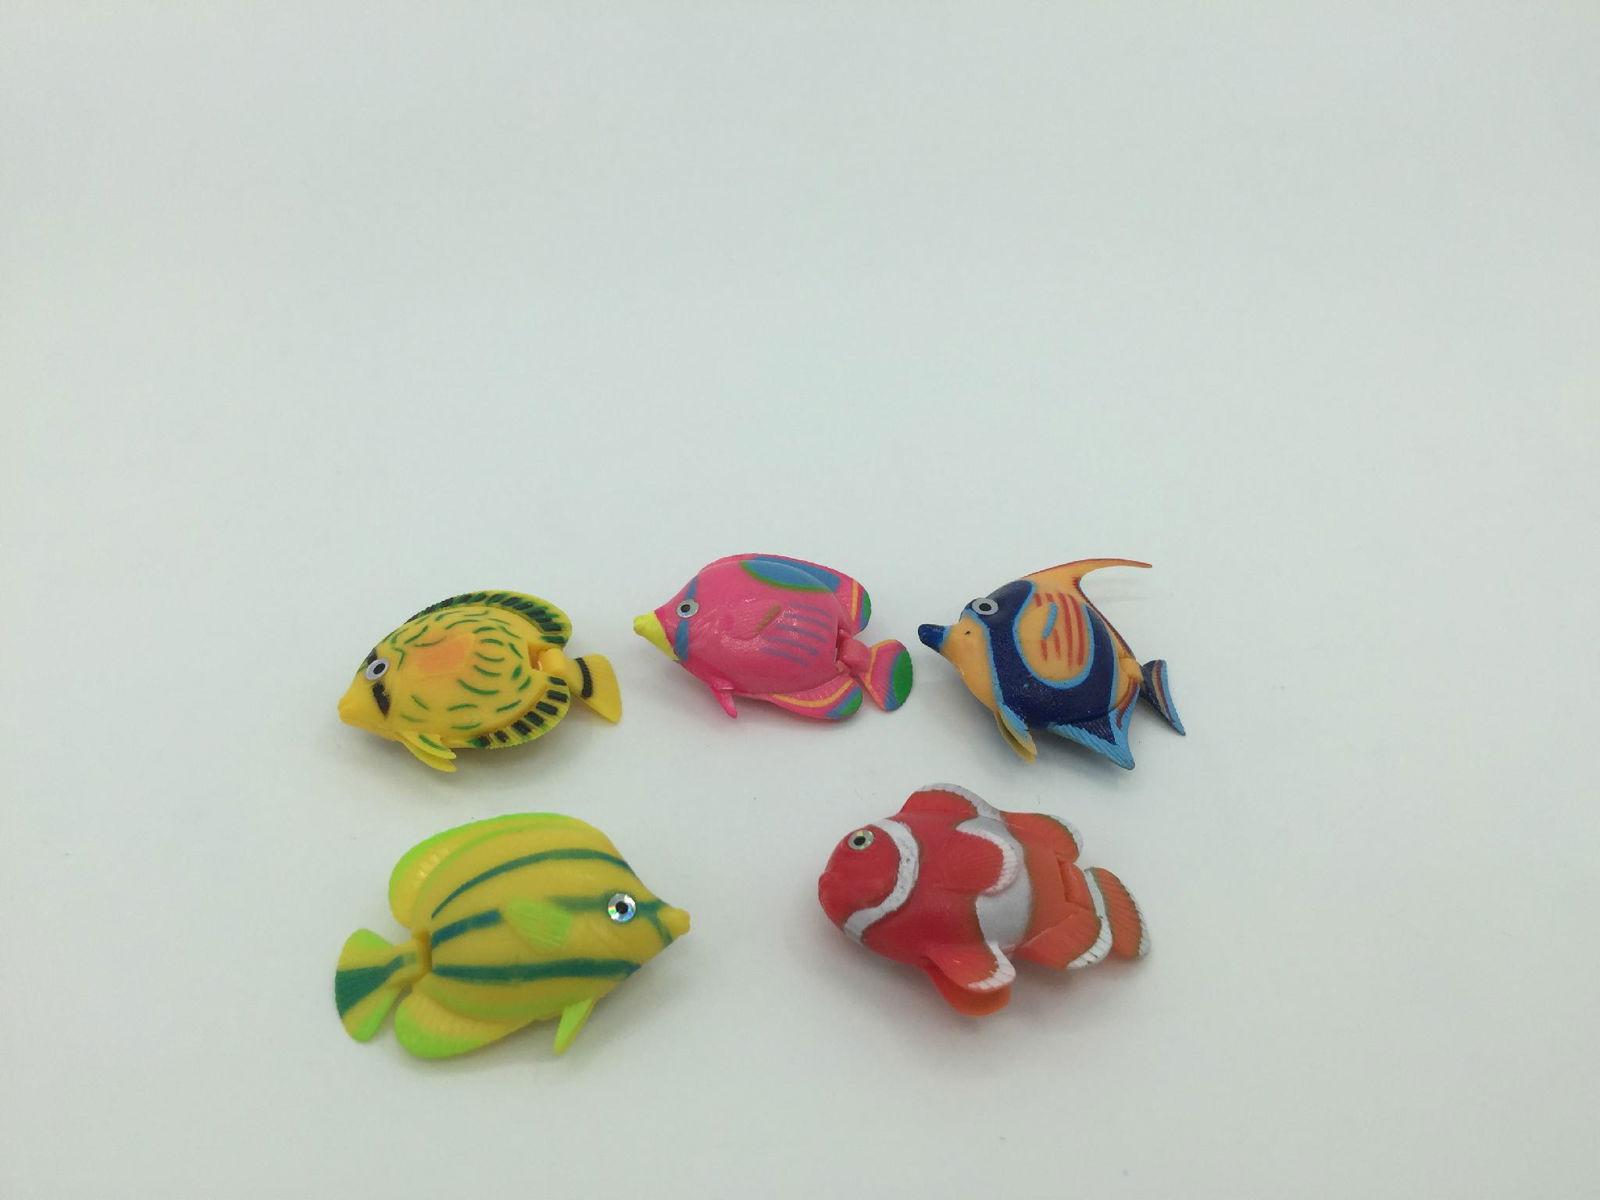 capsule toy-kinds of fishes figures 2